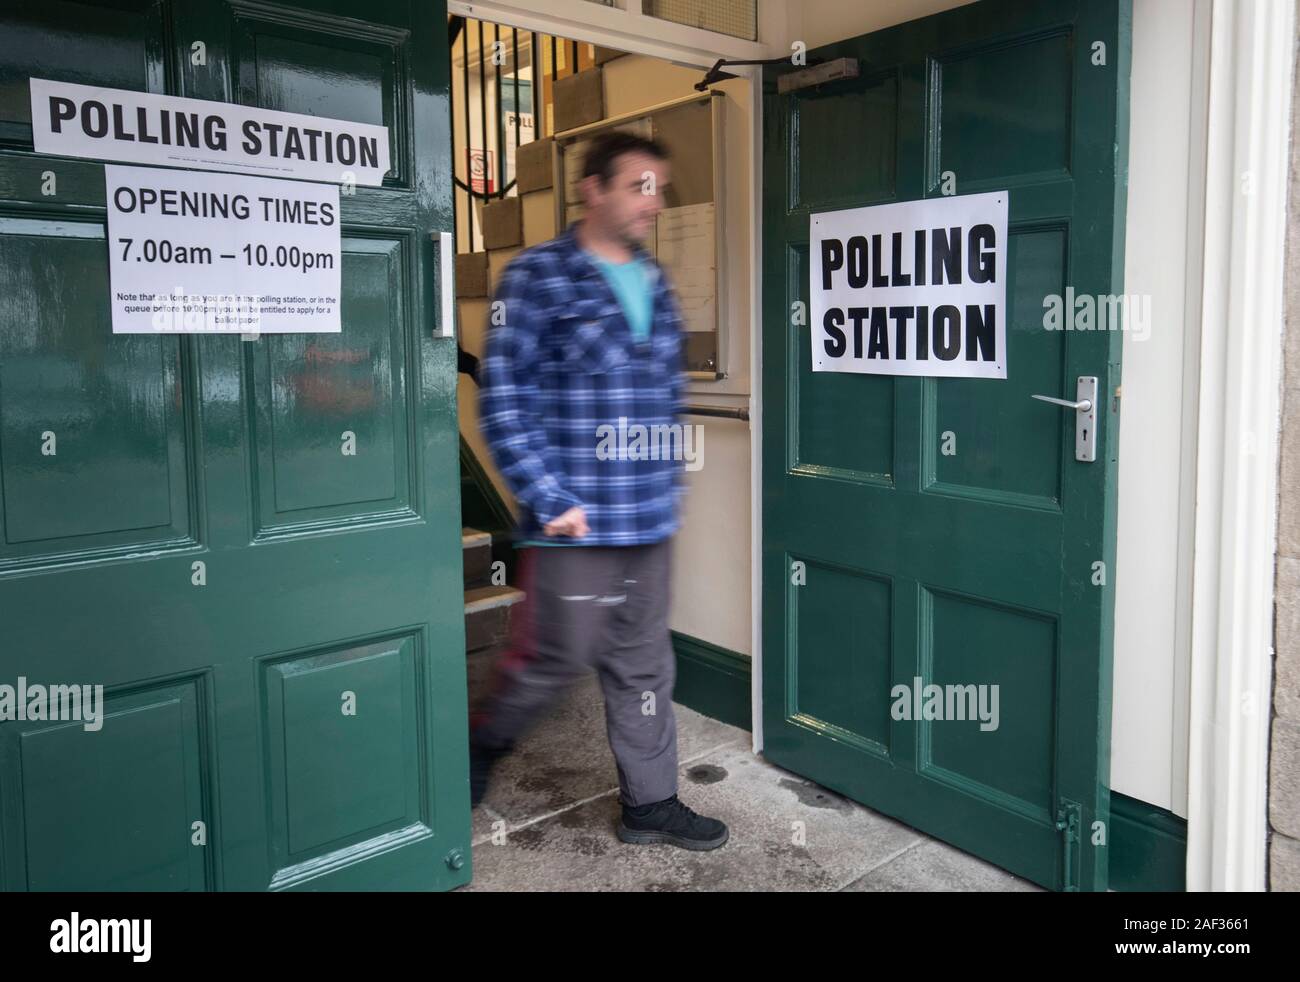 A man leaves a polling station in Hawes, Yorkshire, as voters go to the polls in what has been billed as the most important General Election in a generation. Stock Photo